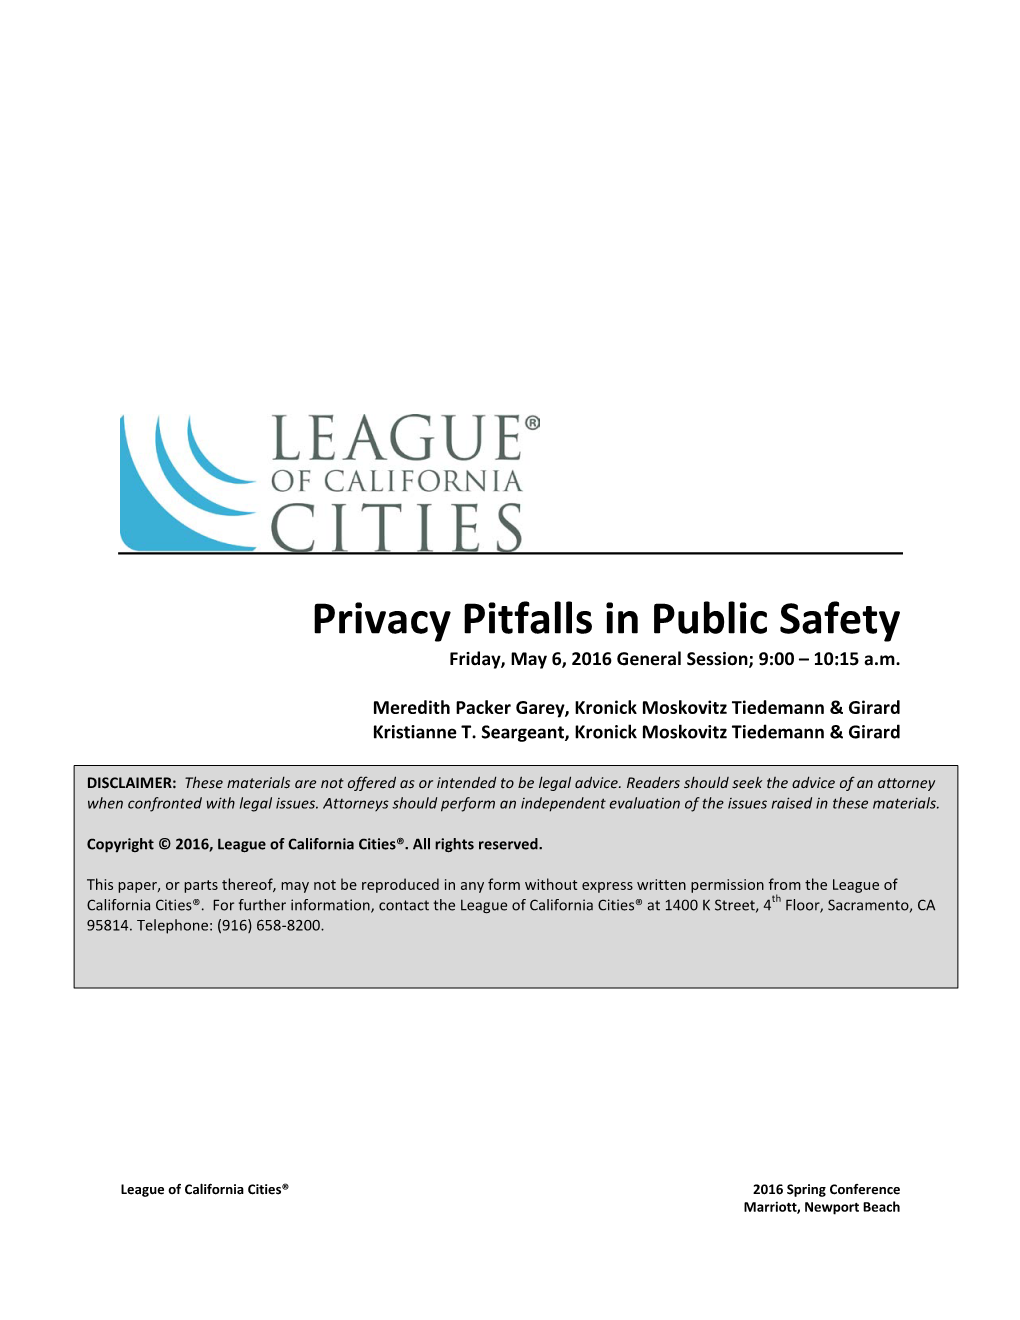 Privacy Pitfalls in Public Safety Friday, May 6, 2016 General Session; 9:00 – 10:15 A.M